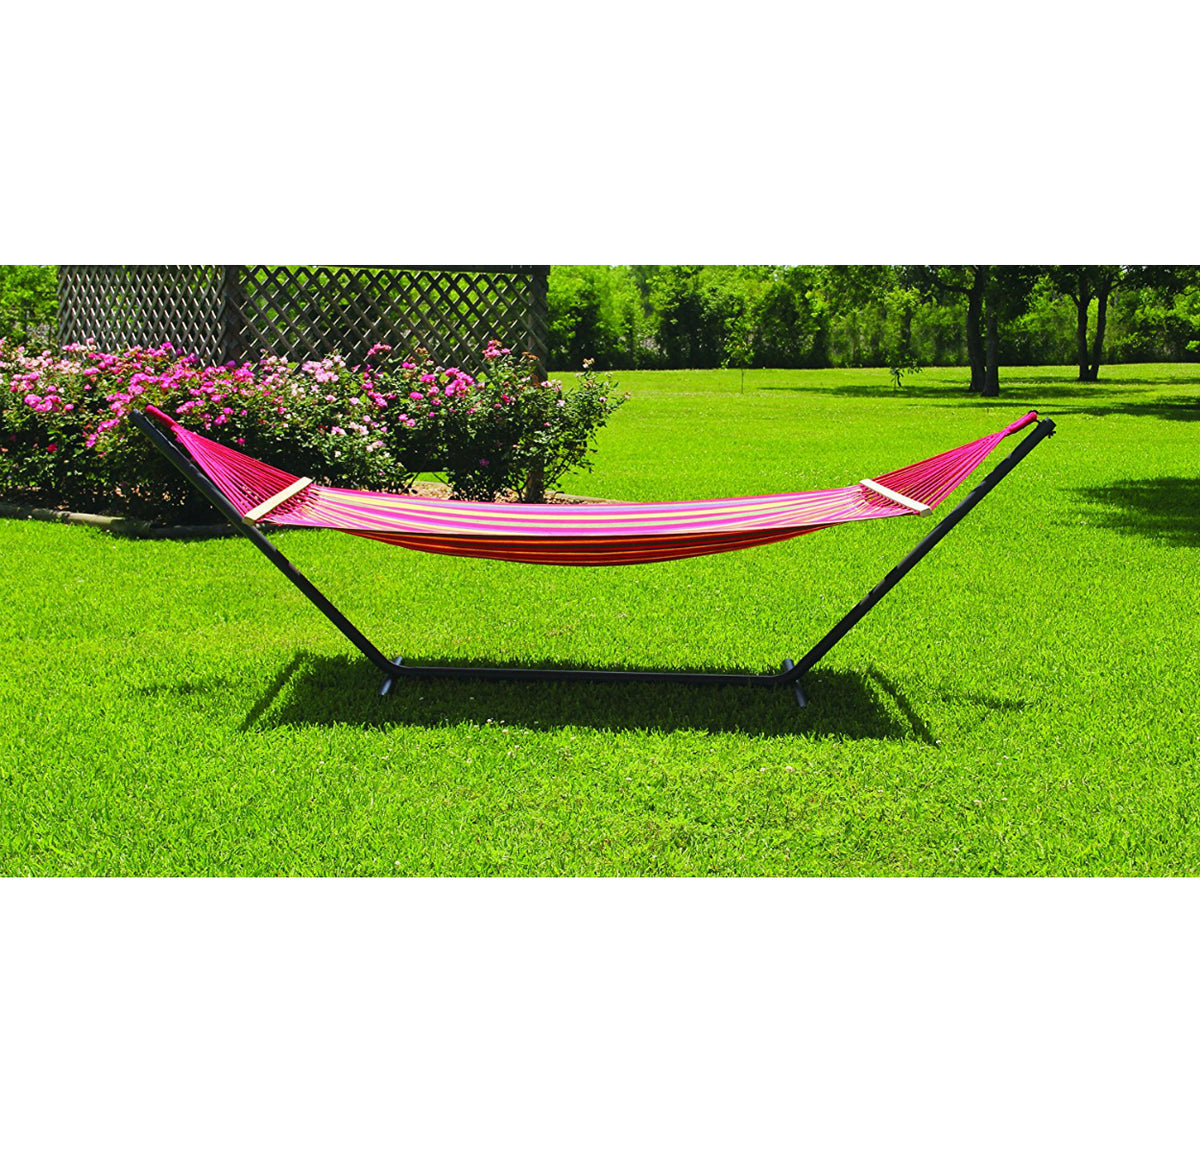 Texsport 14272 Adjustable Hammock Stand with 3-Position Anchor Hook, Steel